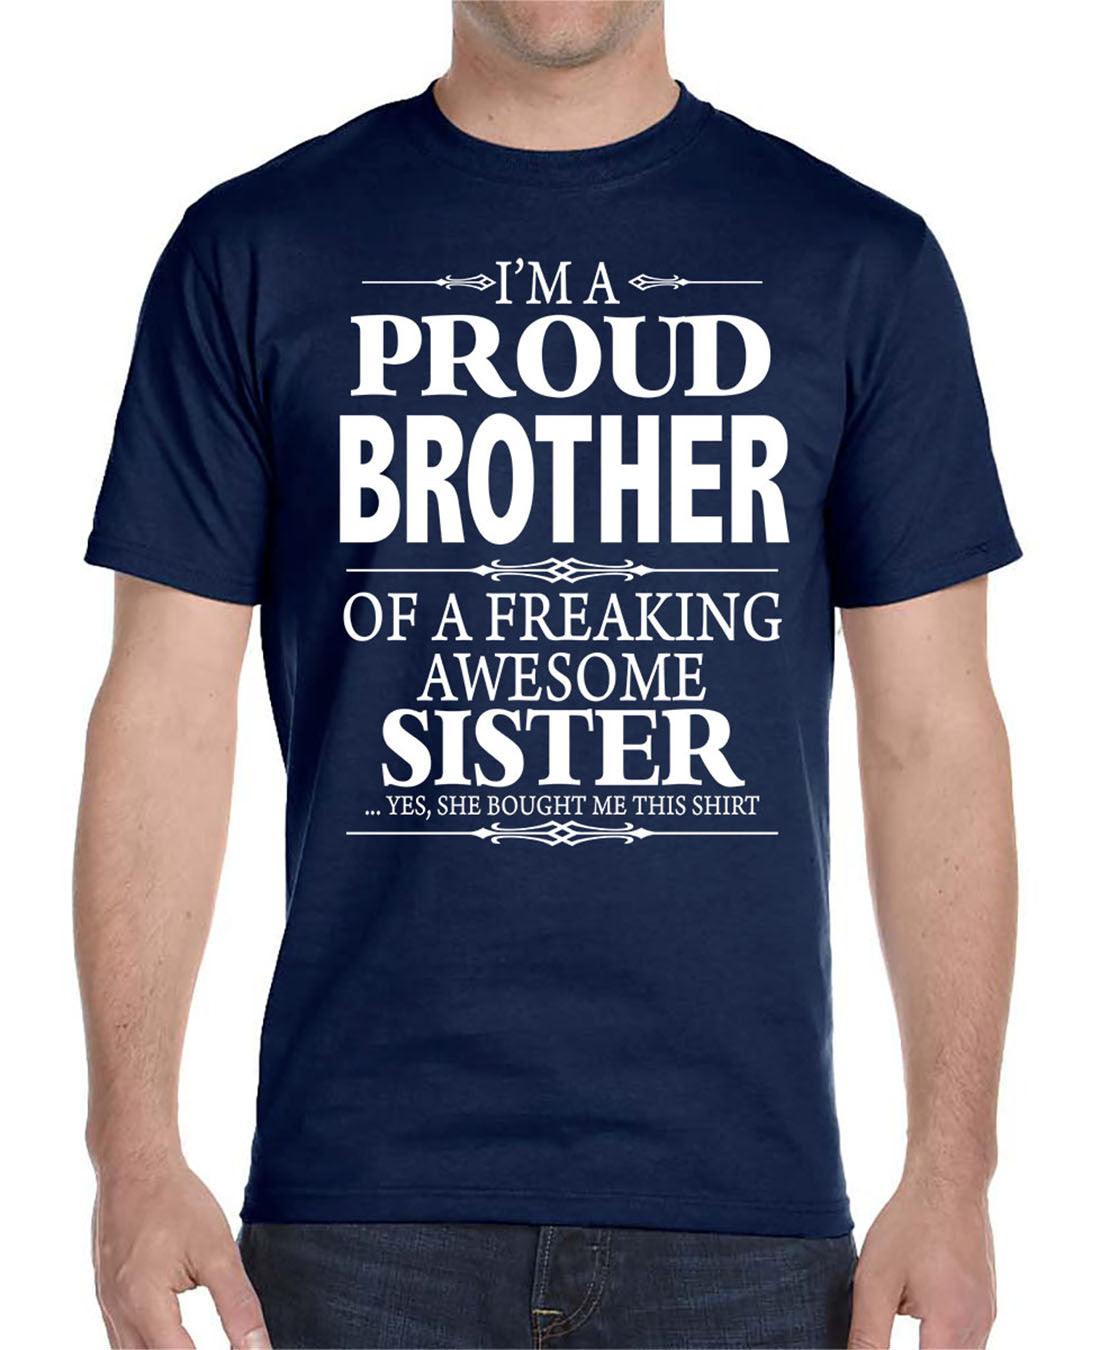 I'm A Proud Brother Of A Freaking Awesome Sister - Unisex T-Shirt Brother Shirt